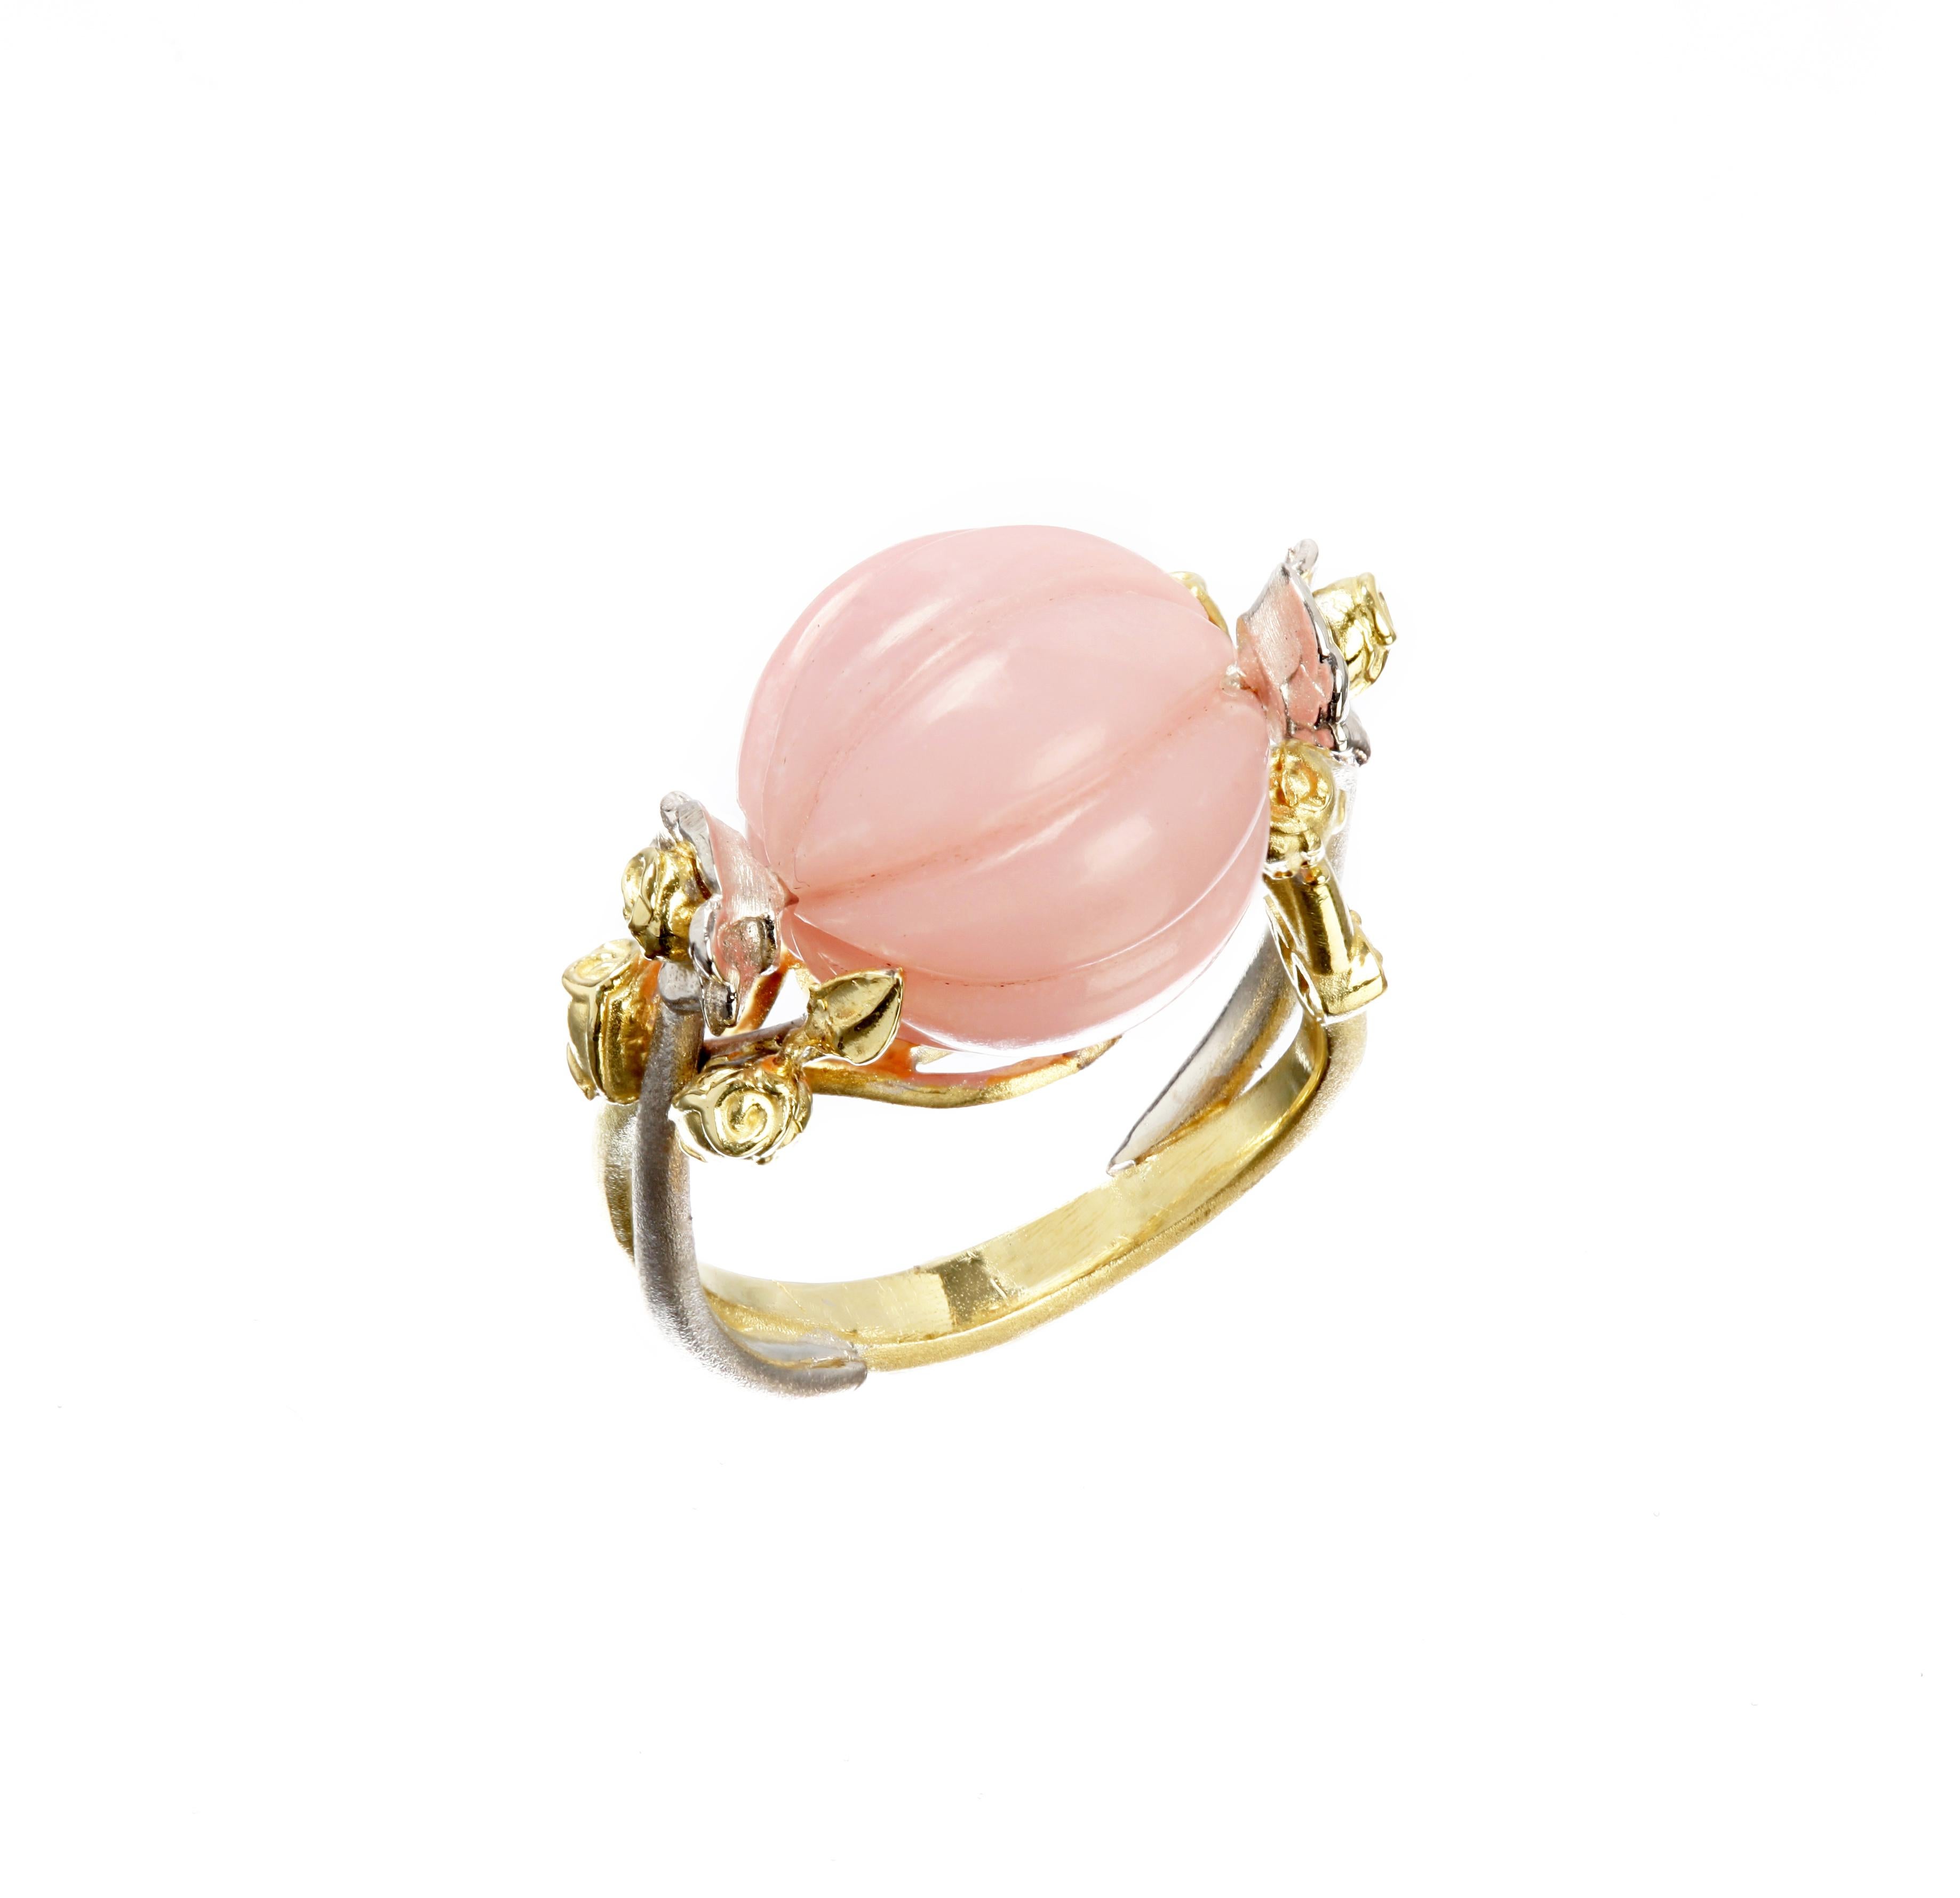 IF YOU ARE REALLY INTERESTED, CONTACT US WITH ANY REASONABLE OFFER. WE WILL TRY OUR BEST TO MAKE YOU HAPPY!

18K Yellow and White Gold Ring with Peruvian Pink Opal Center and Roses

From the Stambolian 